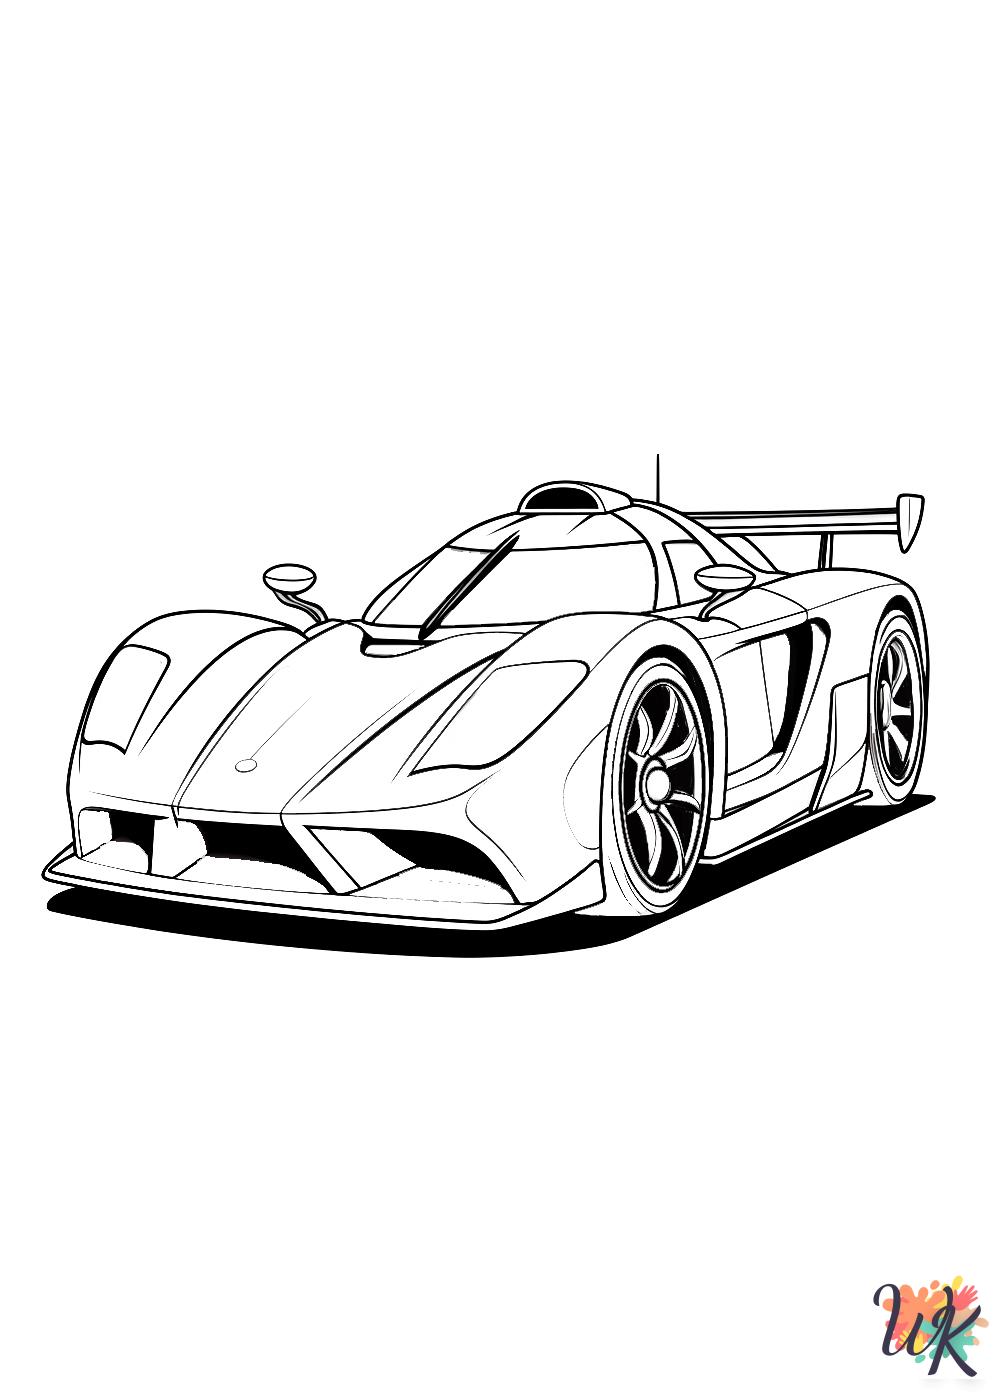 Race Car coloring pages for adults easy